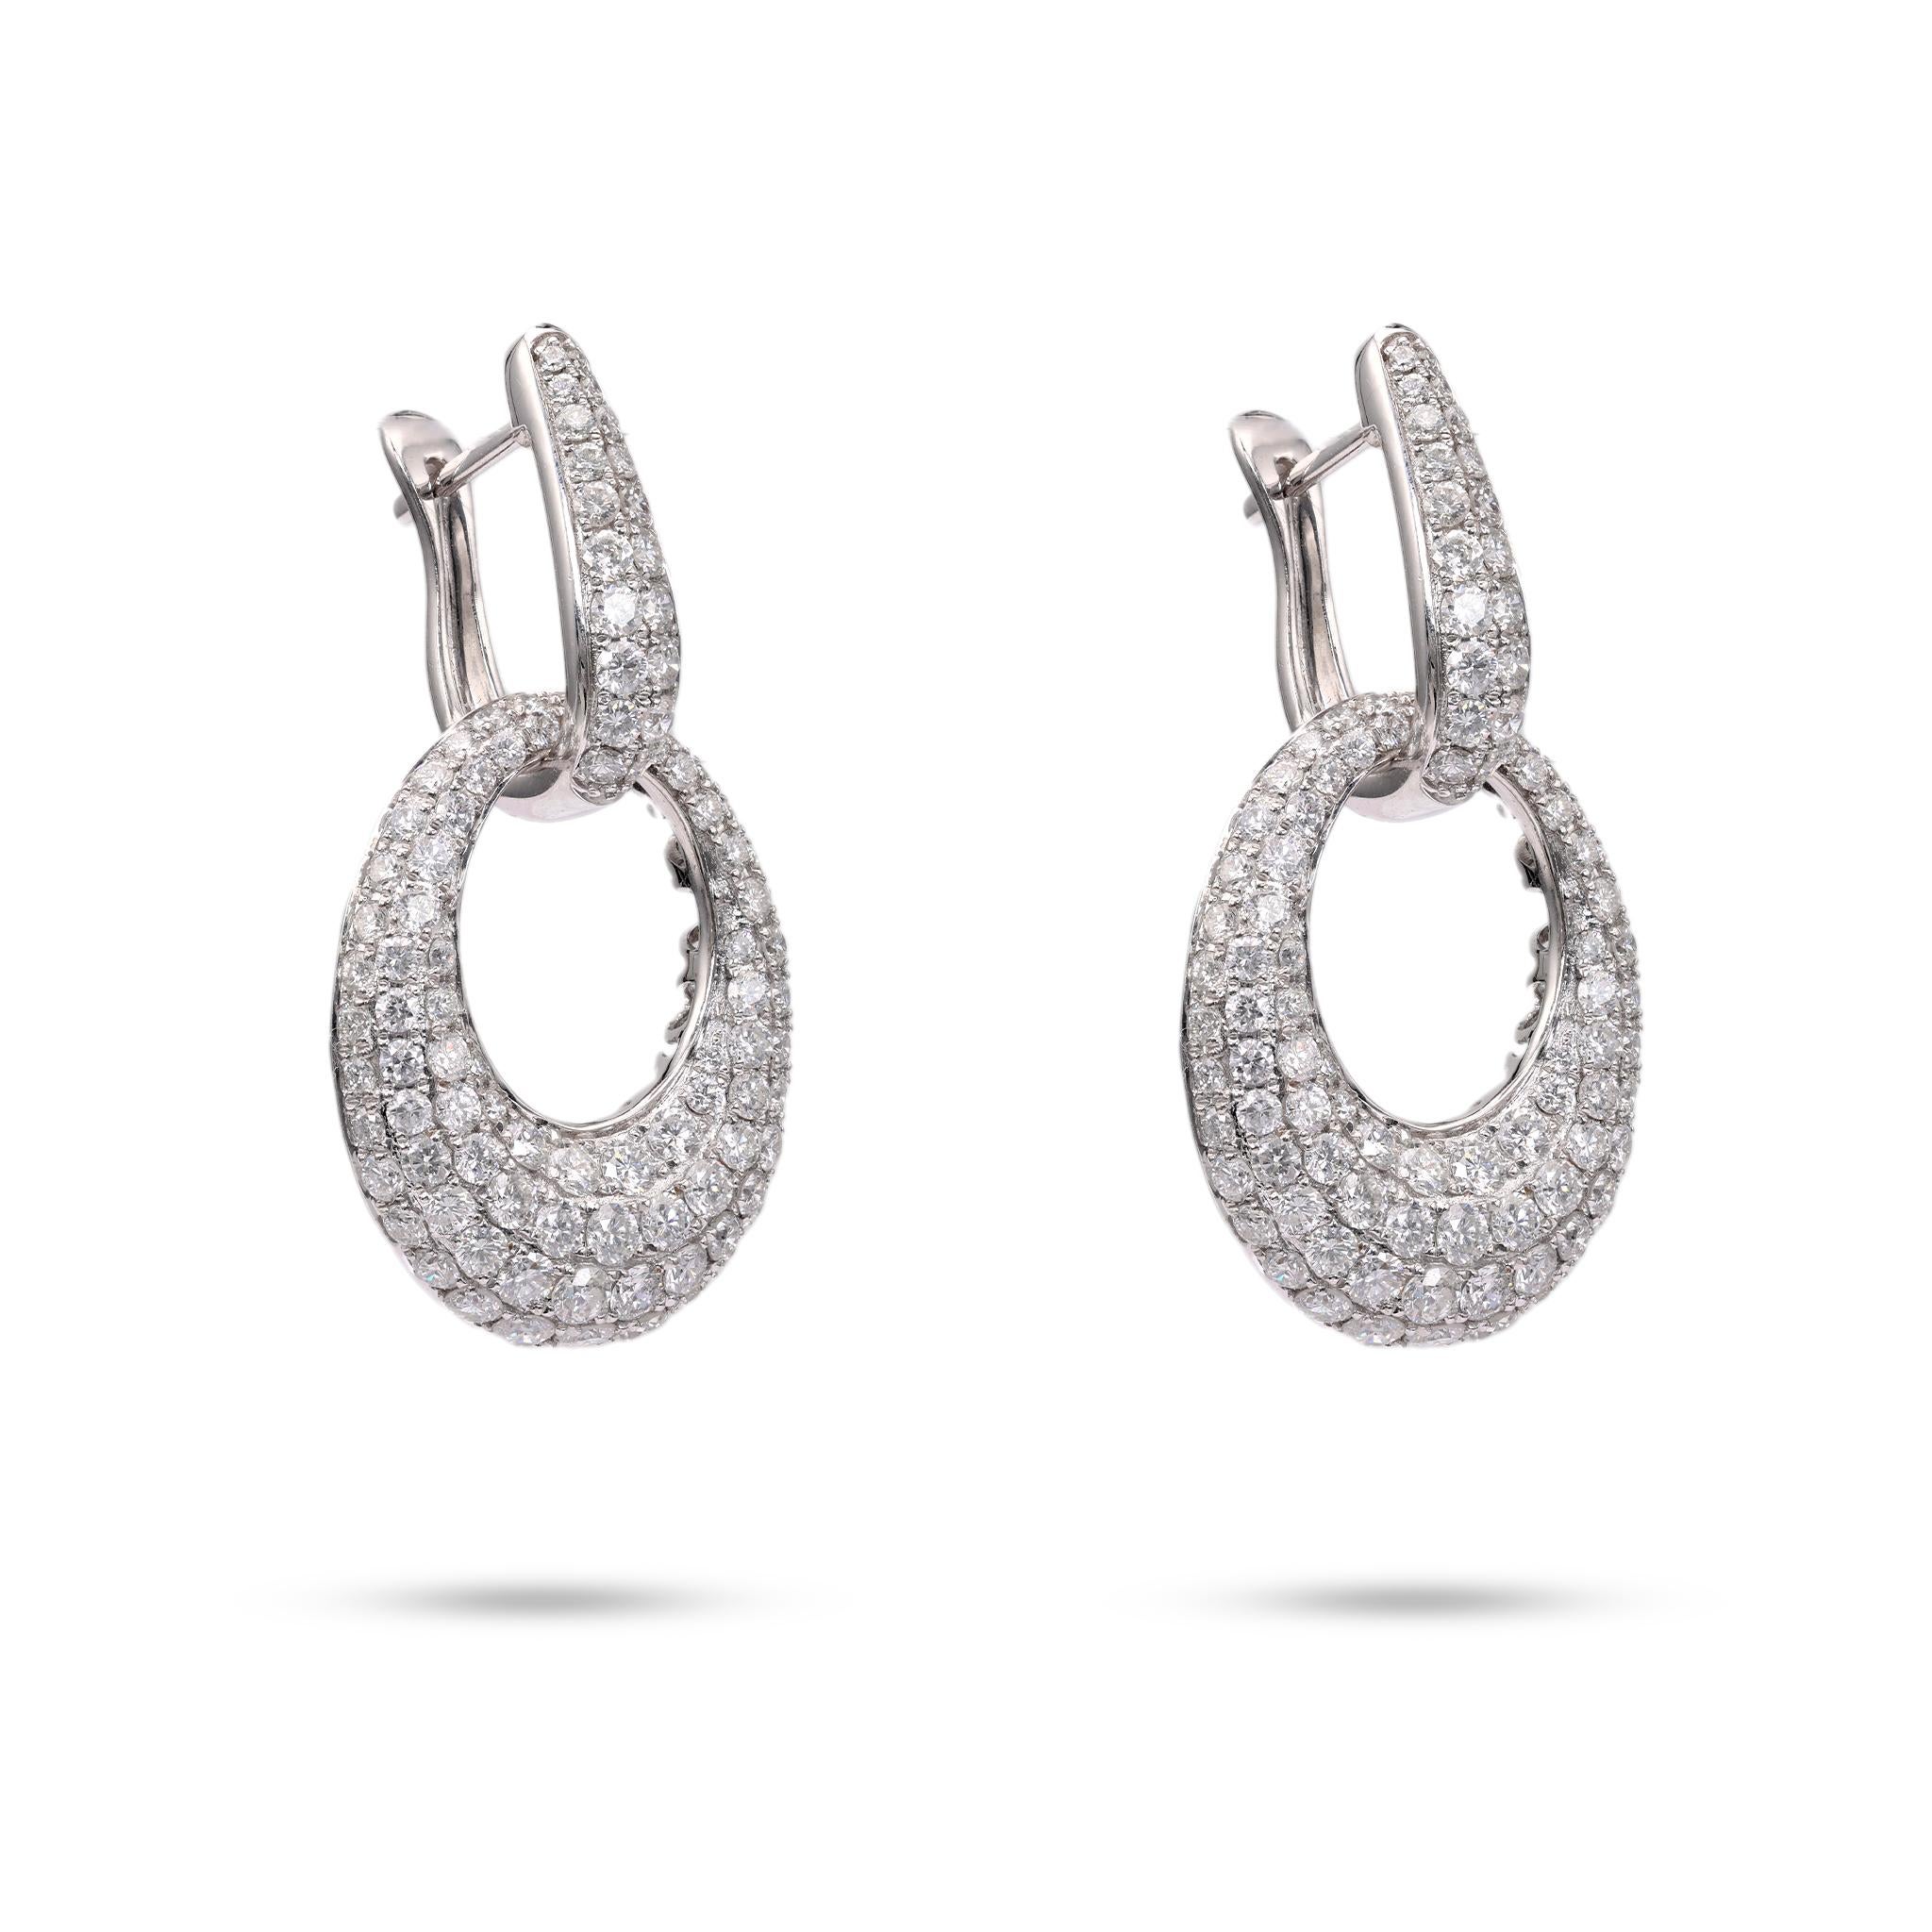 4.99 Carat Total Weight Diamond 18k White Gold Day to Night Earrings In Excellent Condition For Sale In Beverly Hills, CA